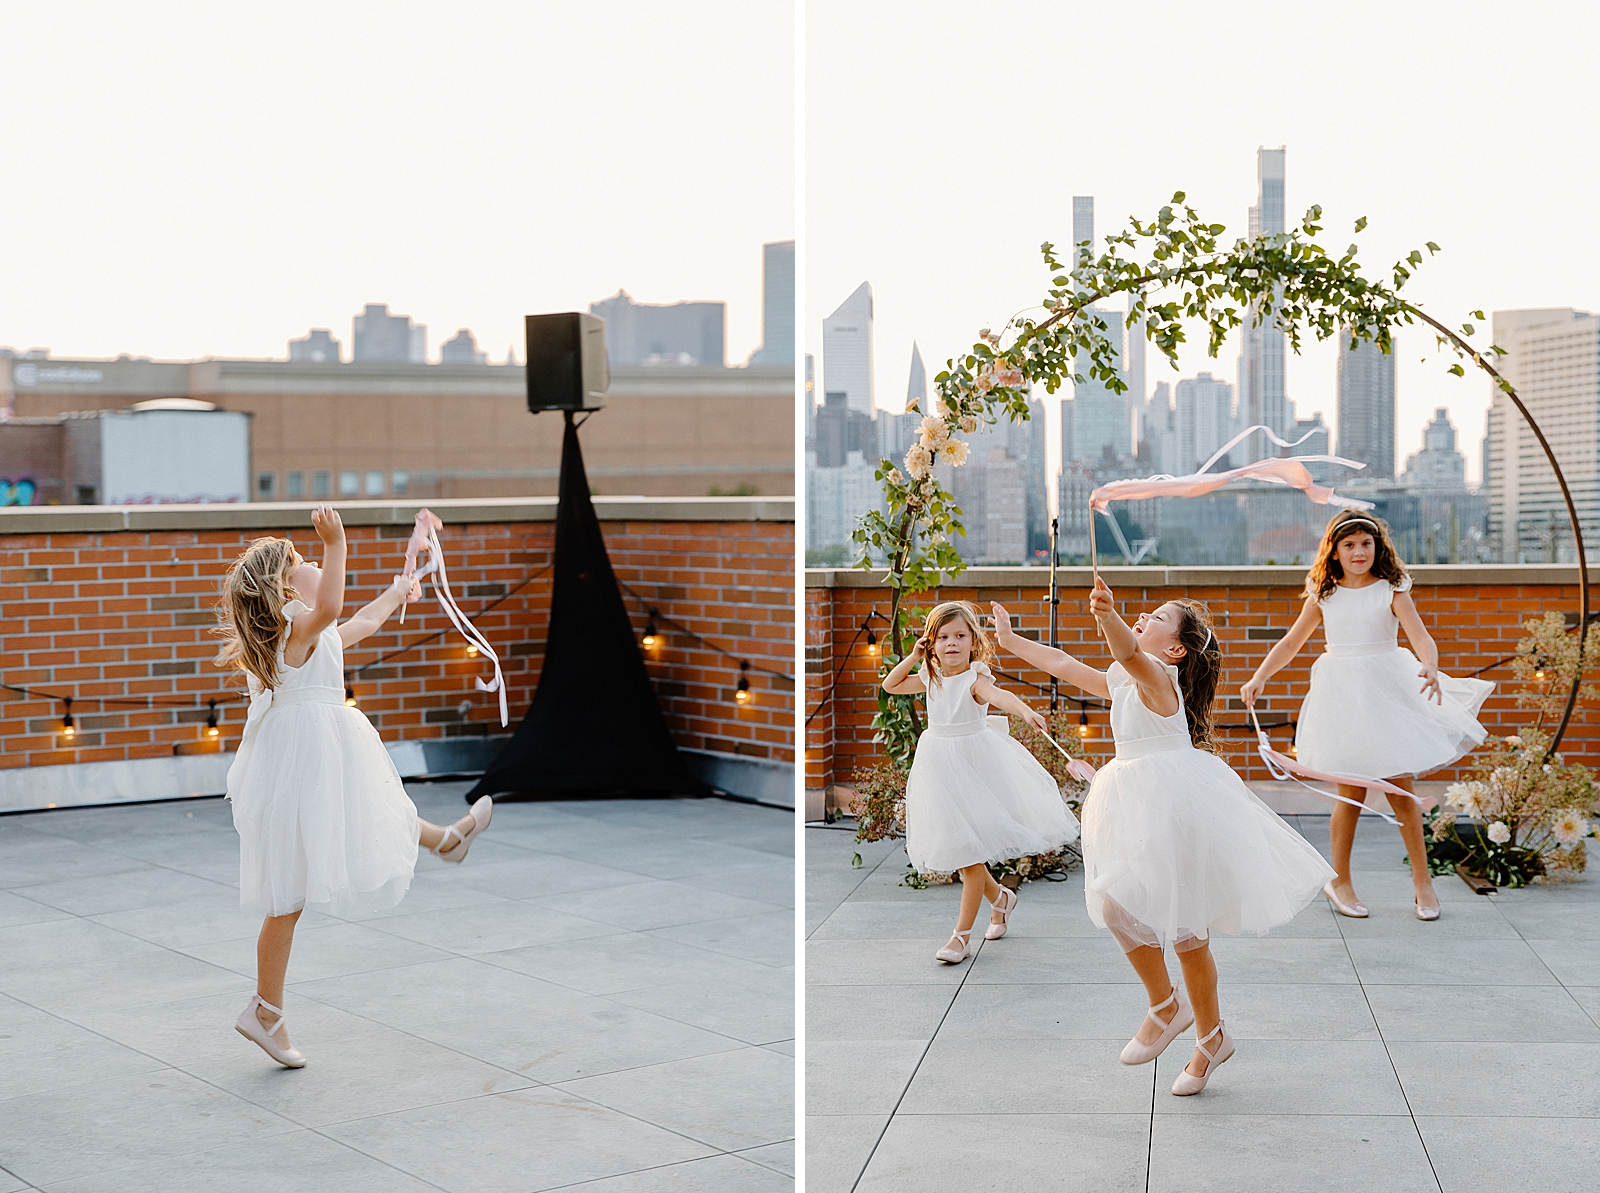 Flower girls with streamers dancing by circular alter